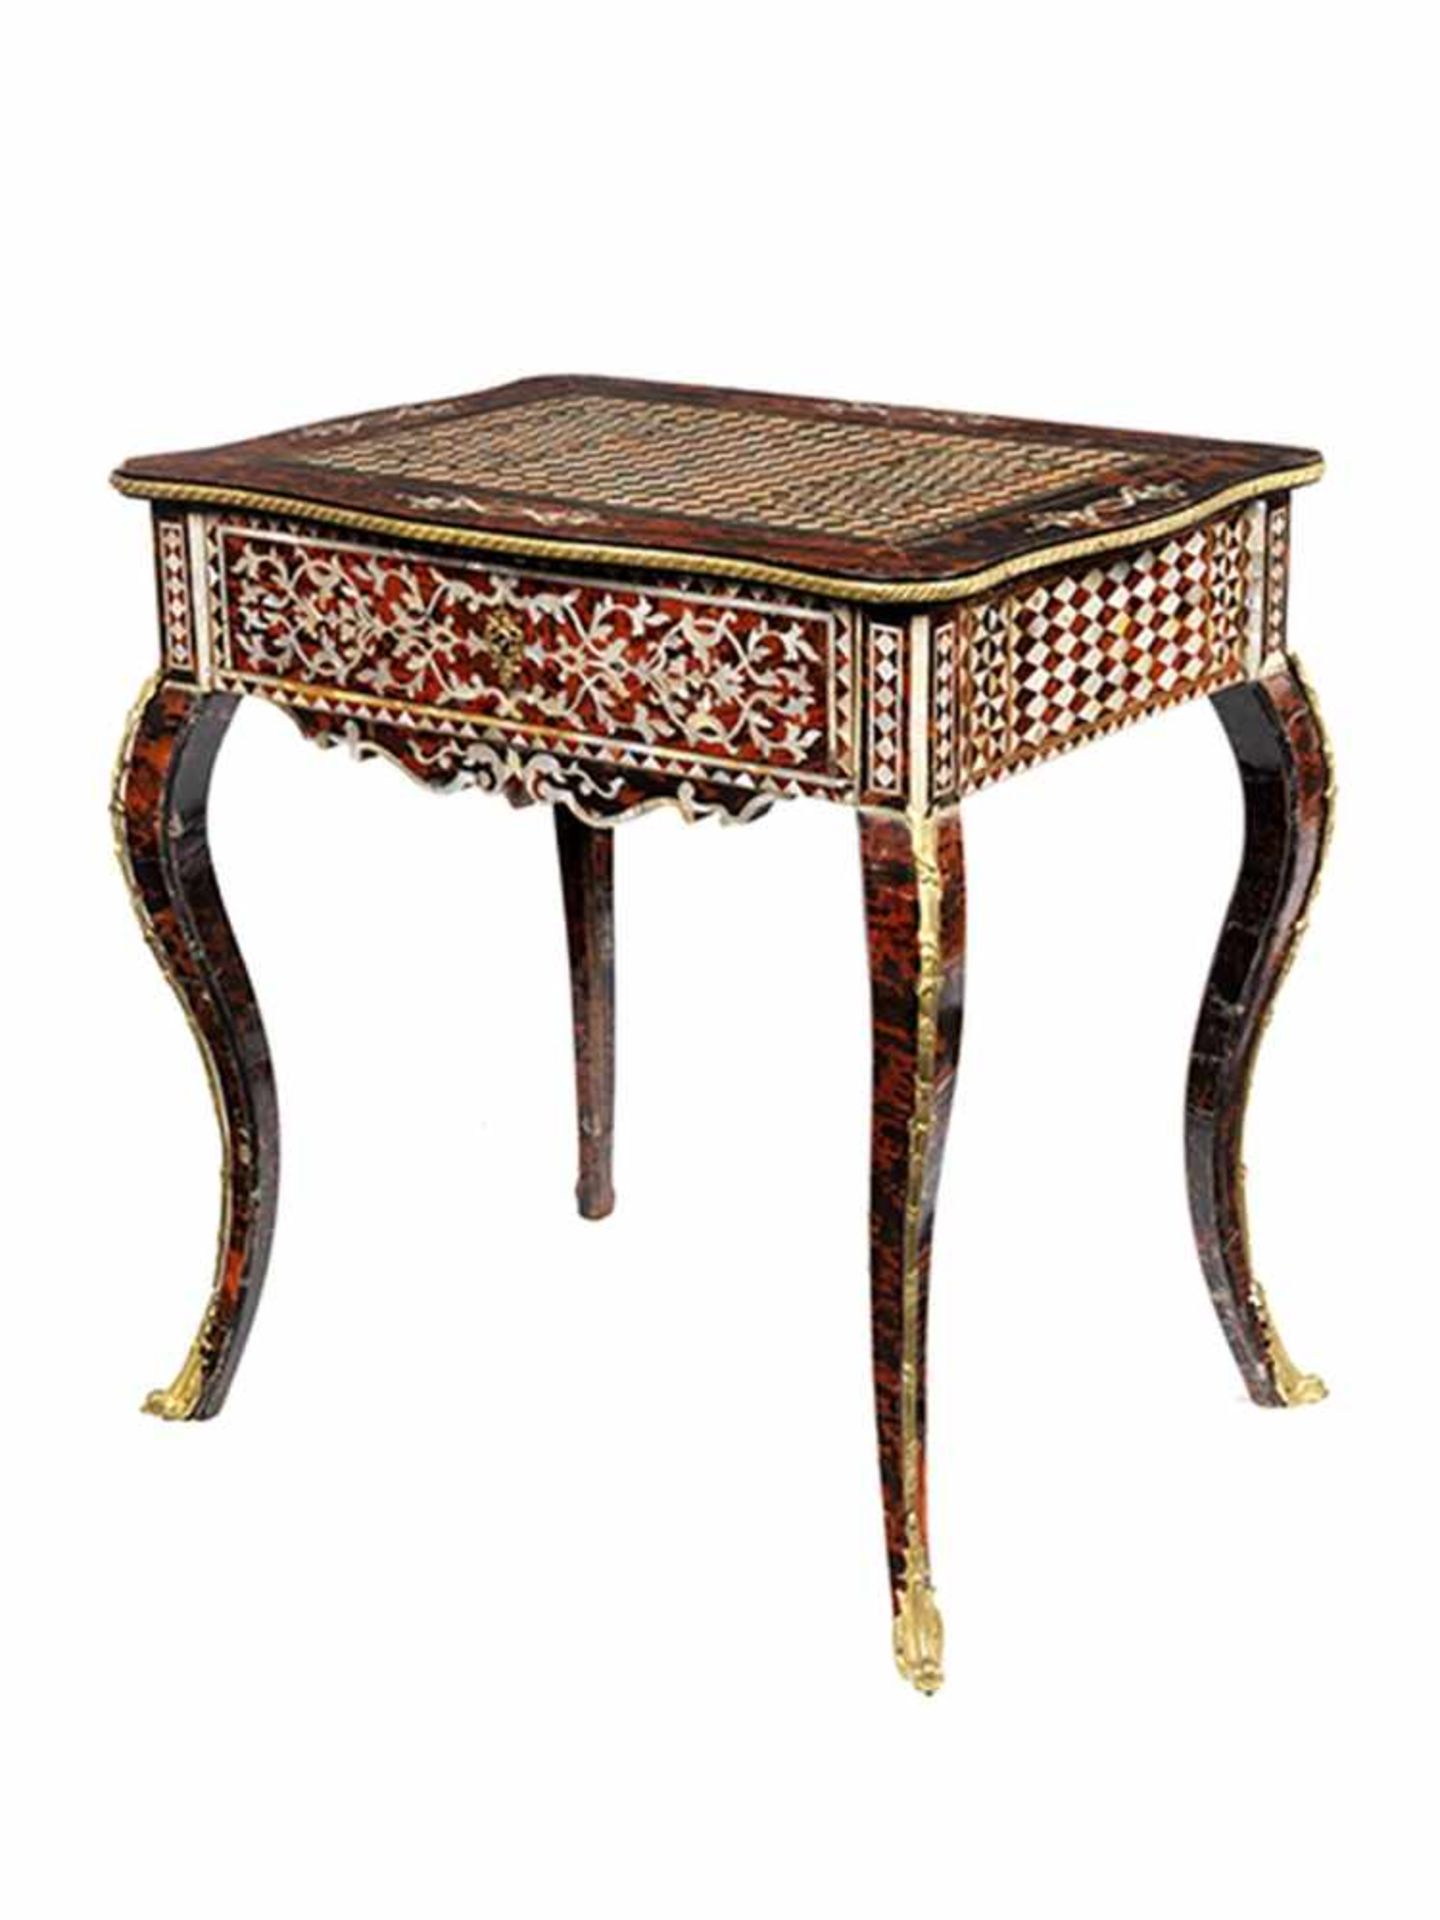 Important combination games table with tortoiseshell and mother-of-pearl décor - Bild 8 aus 8